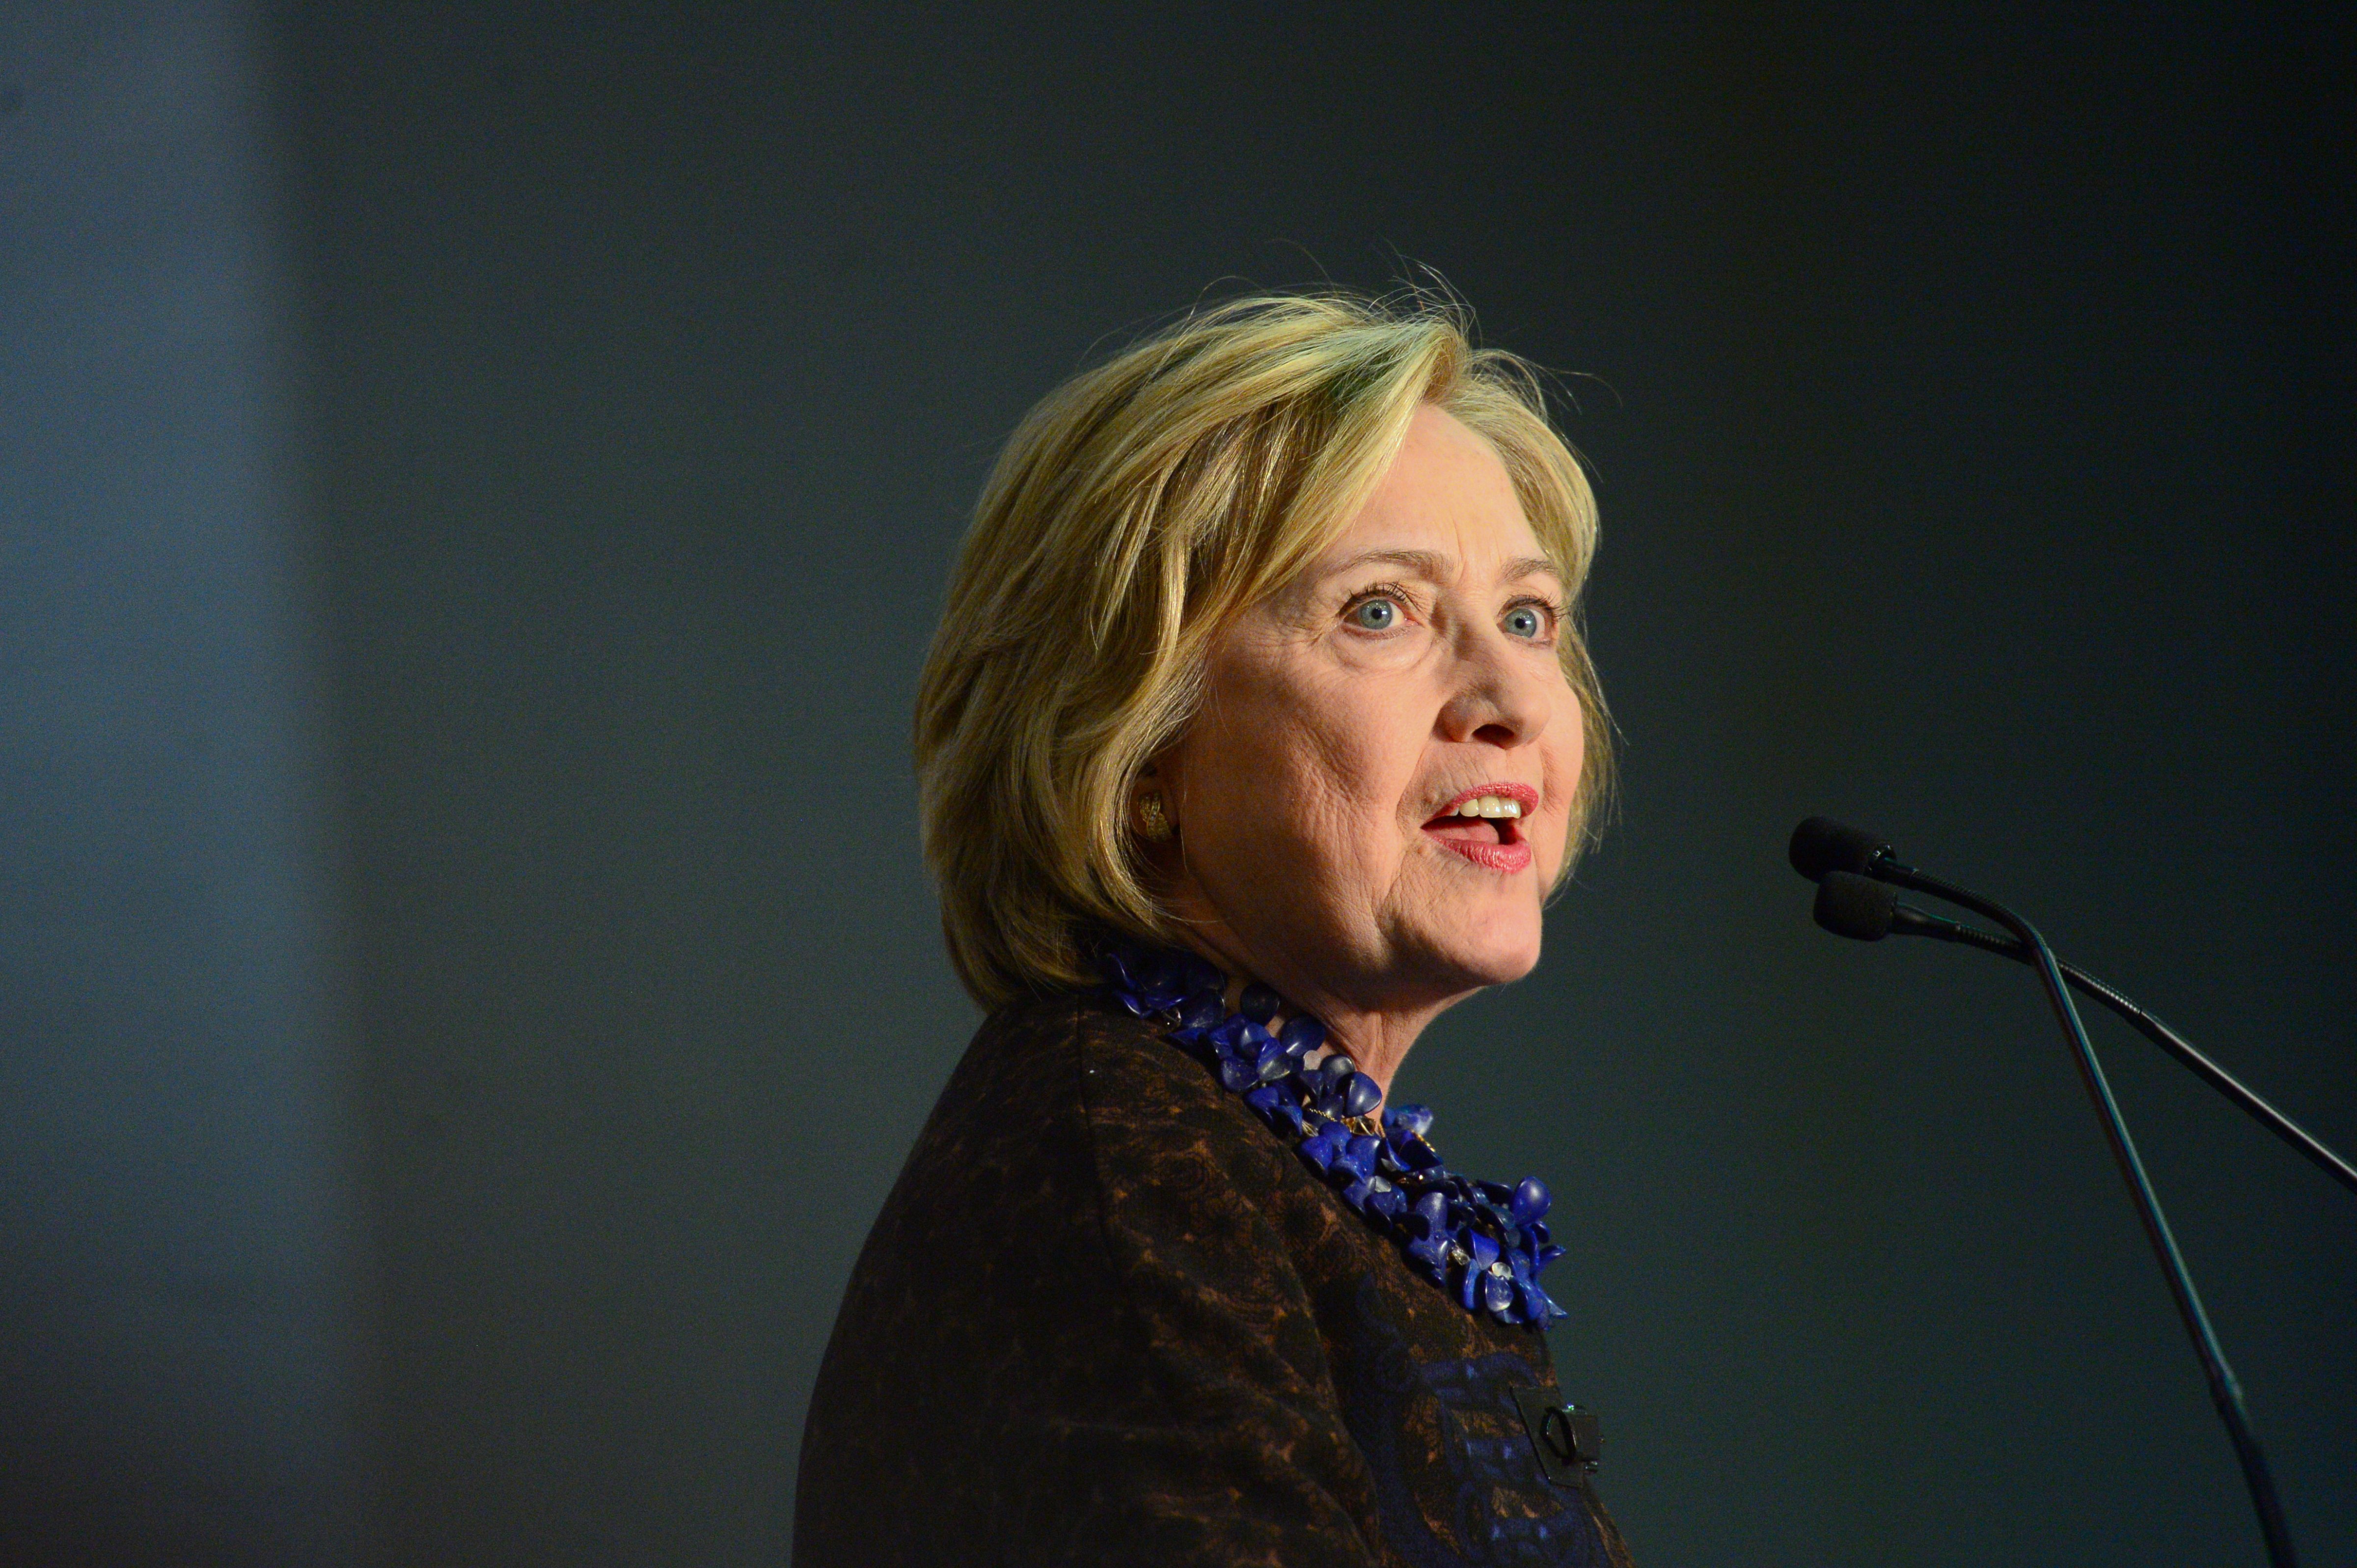 Democratic Presidential candidate Hillary Clinton Speaks to Supporters during the "African Americans for Hillary Grassroots Organizing Meeting with Hillary Clinton" event at Clark Atlanta University Gymnasium on October 30, 2015 in Atlanta, Georgia. (Prince Williams&mdash;WireImage/Getty Images)